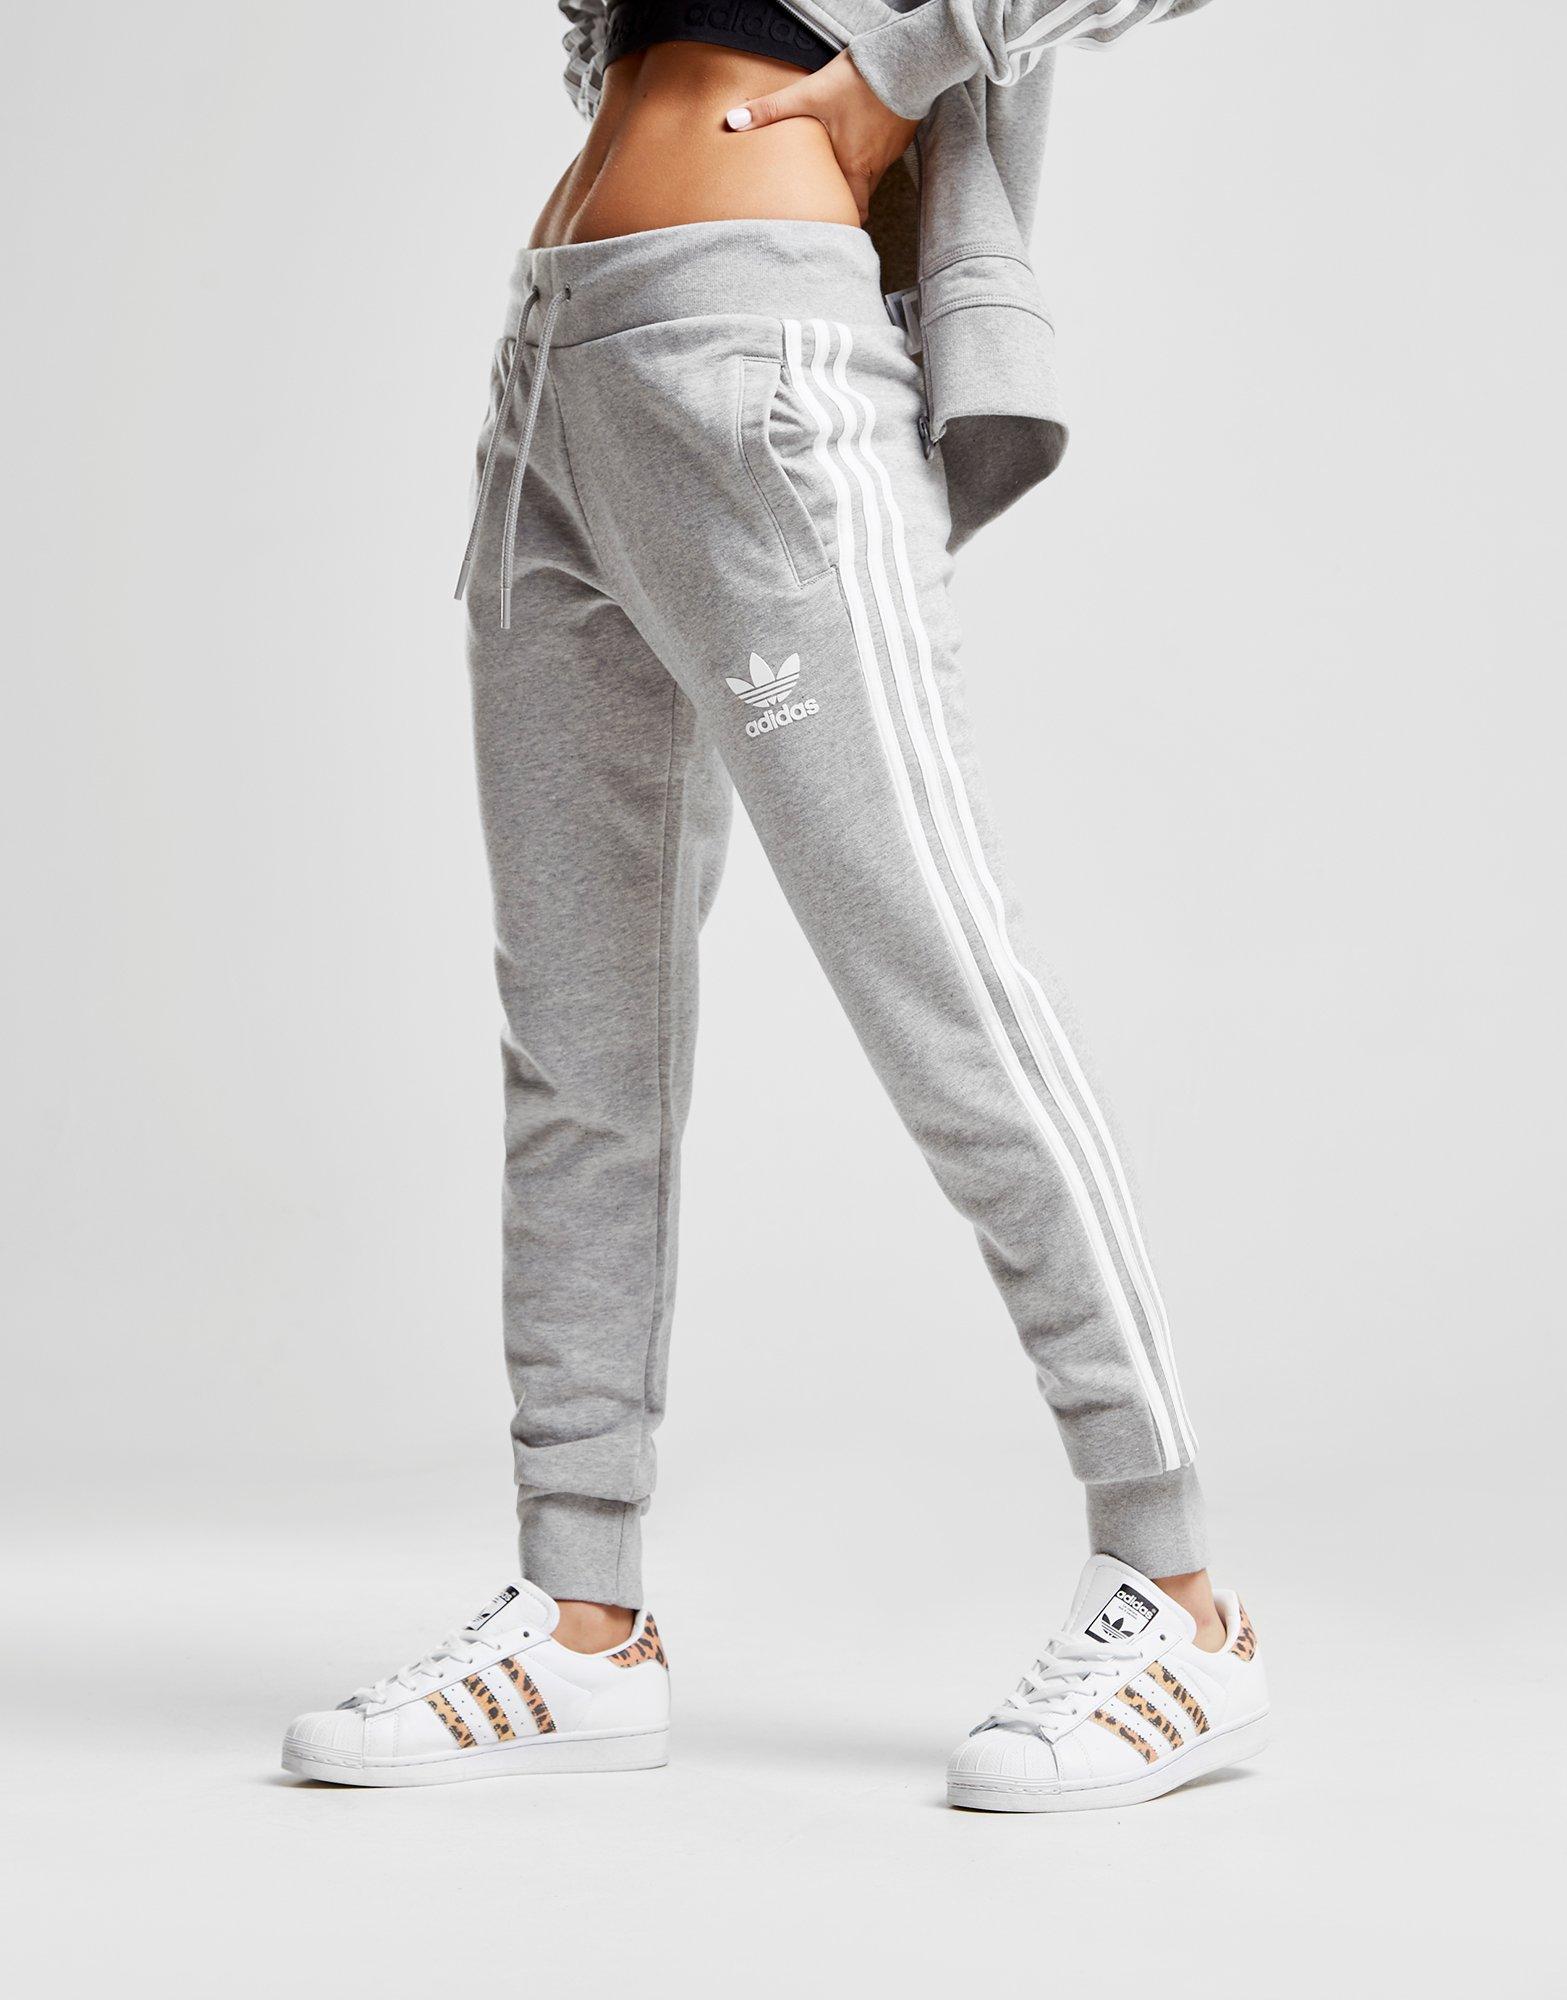 chandal adidas gris mujer